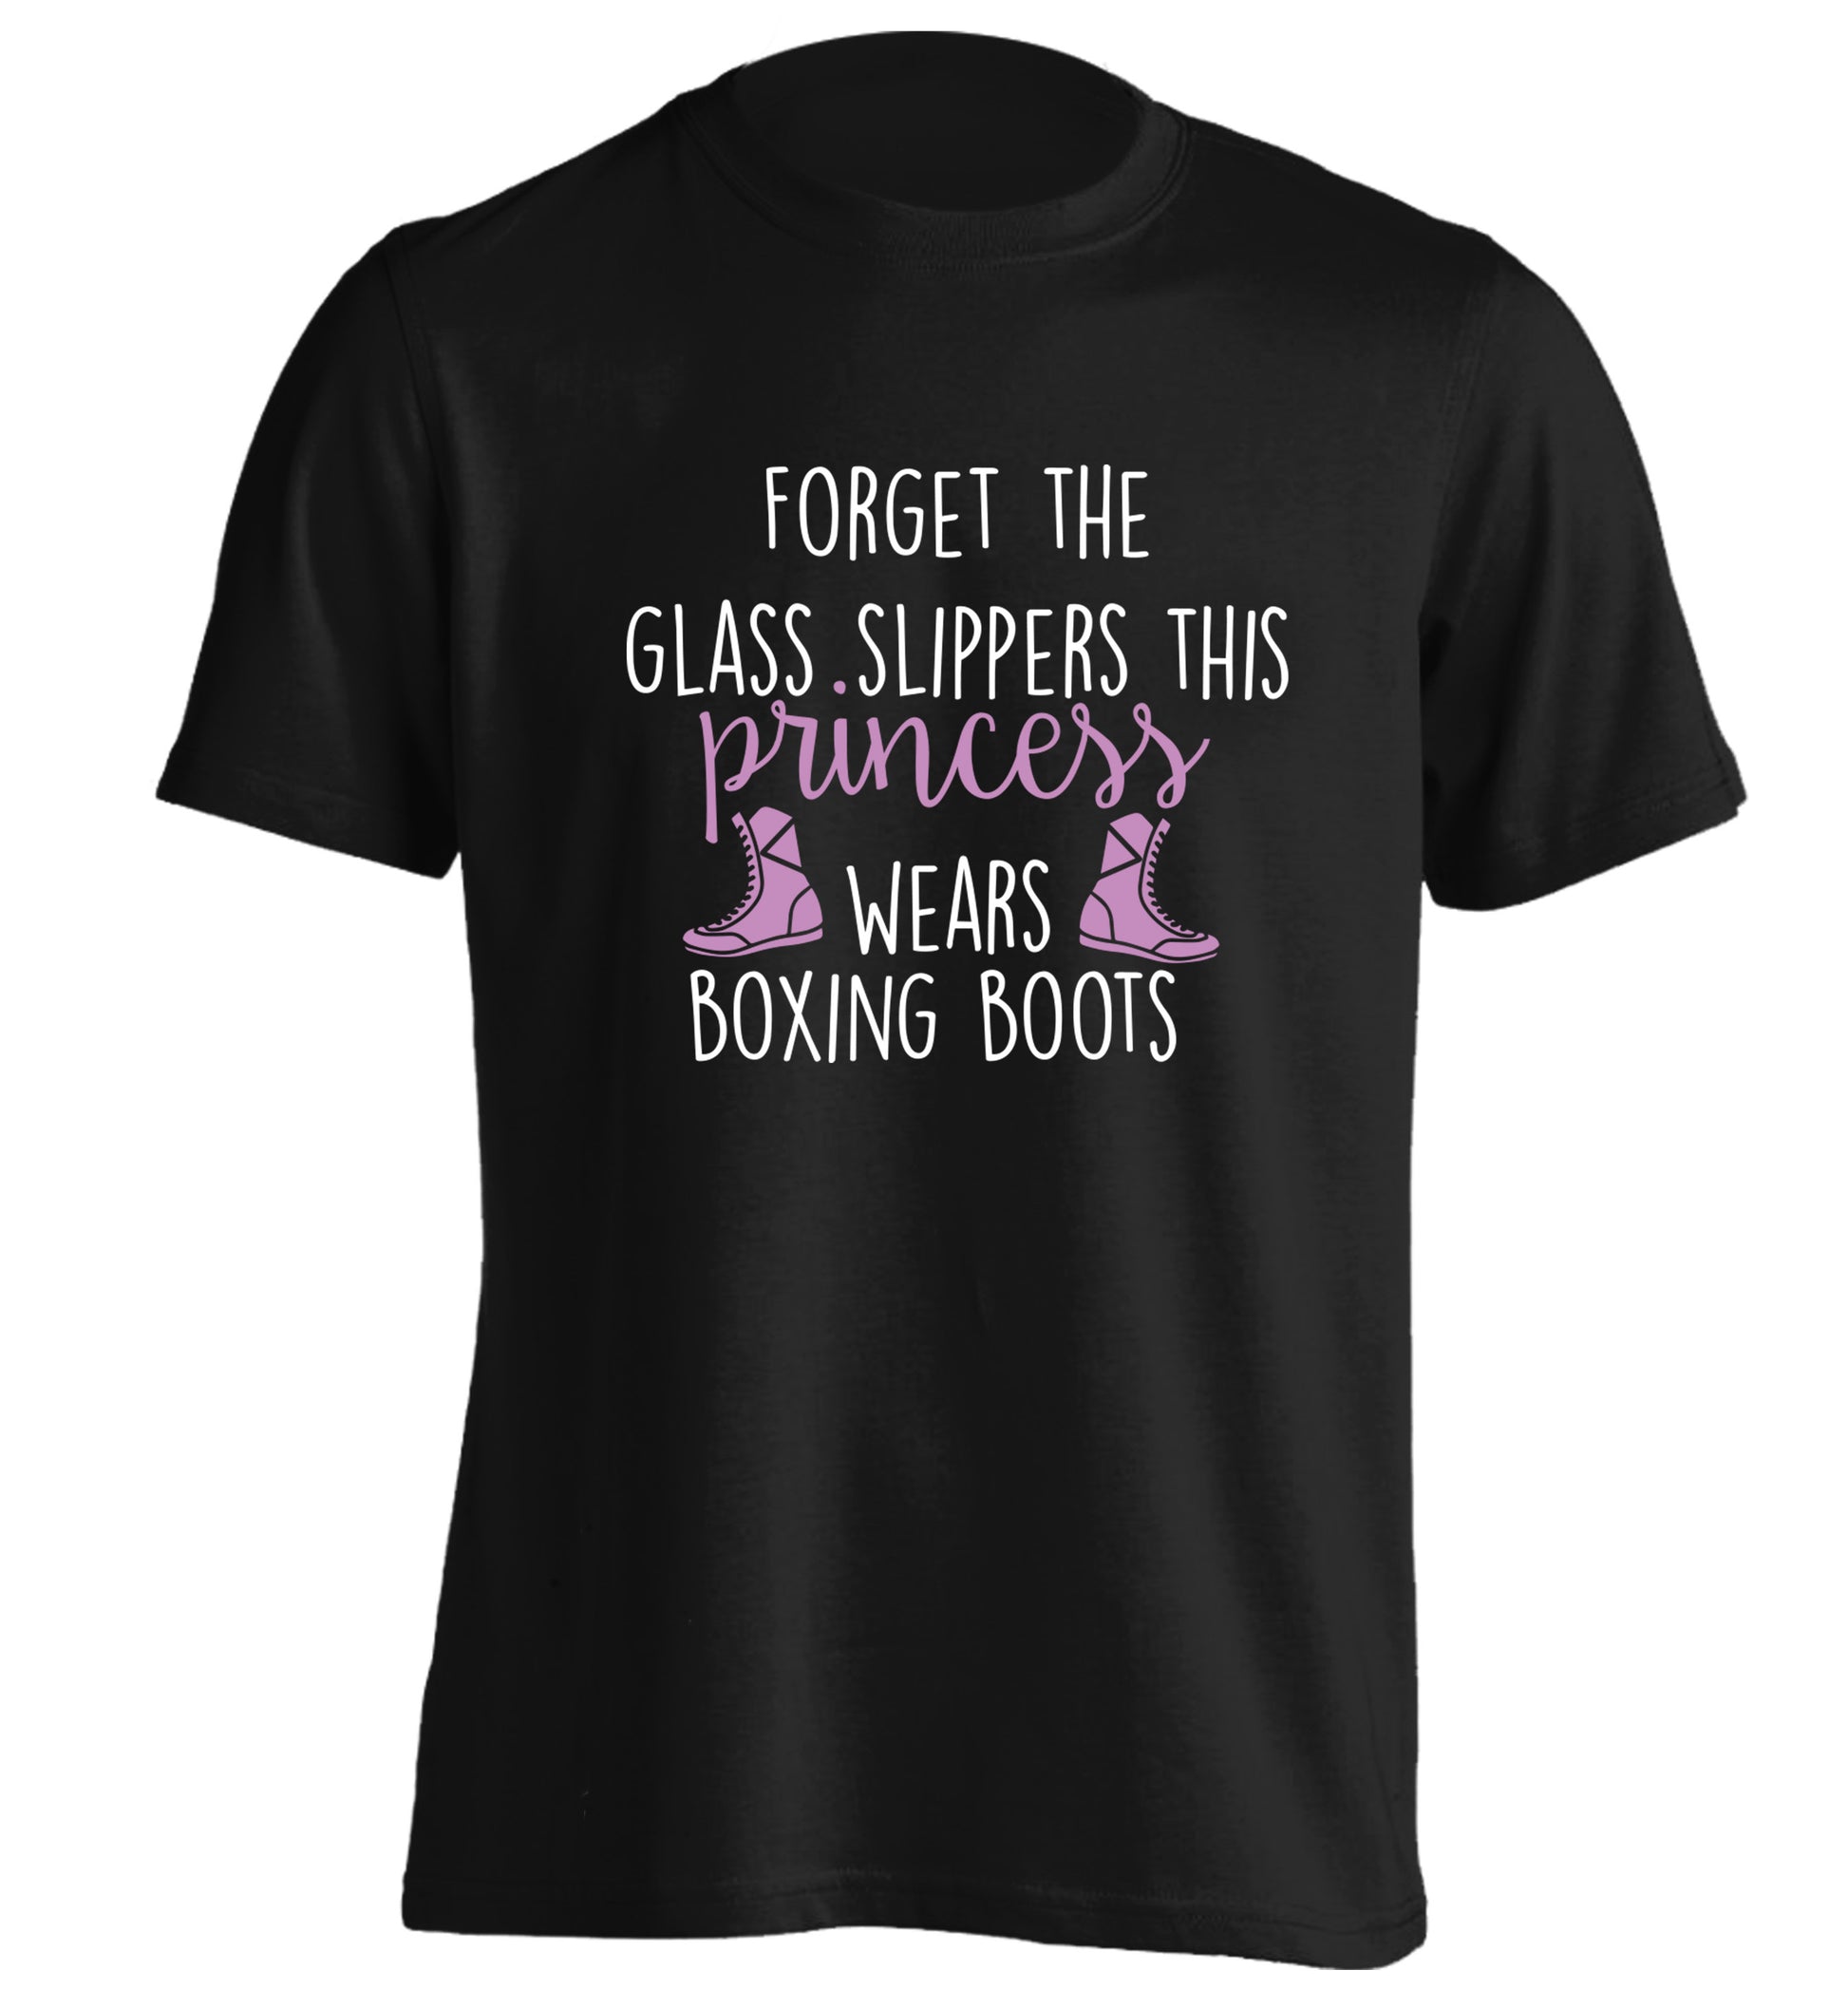 Forget the glass slippers this princess wears boxing boots adults unisex black Tshirt 2XL